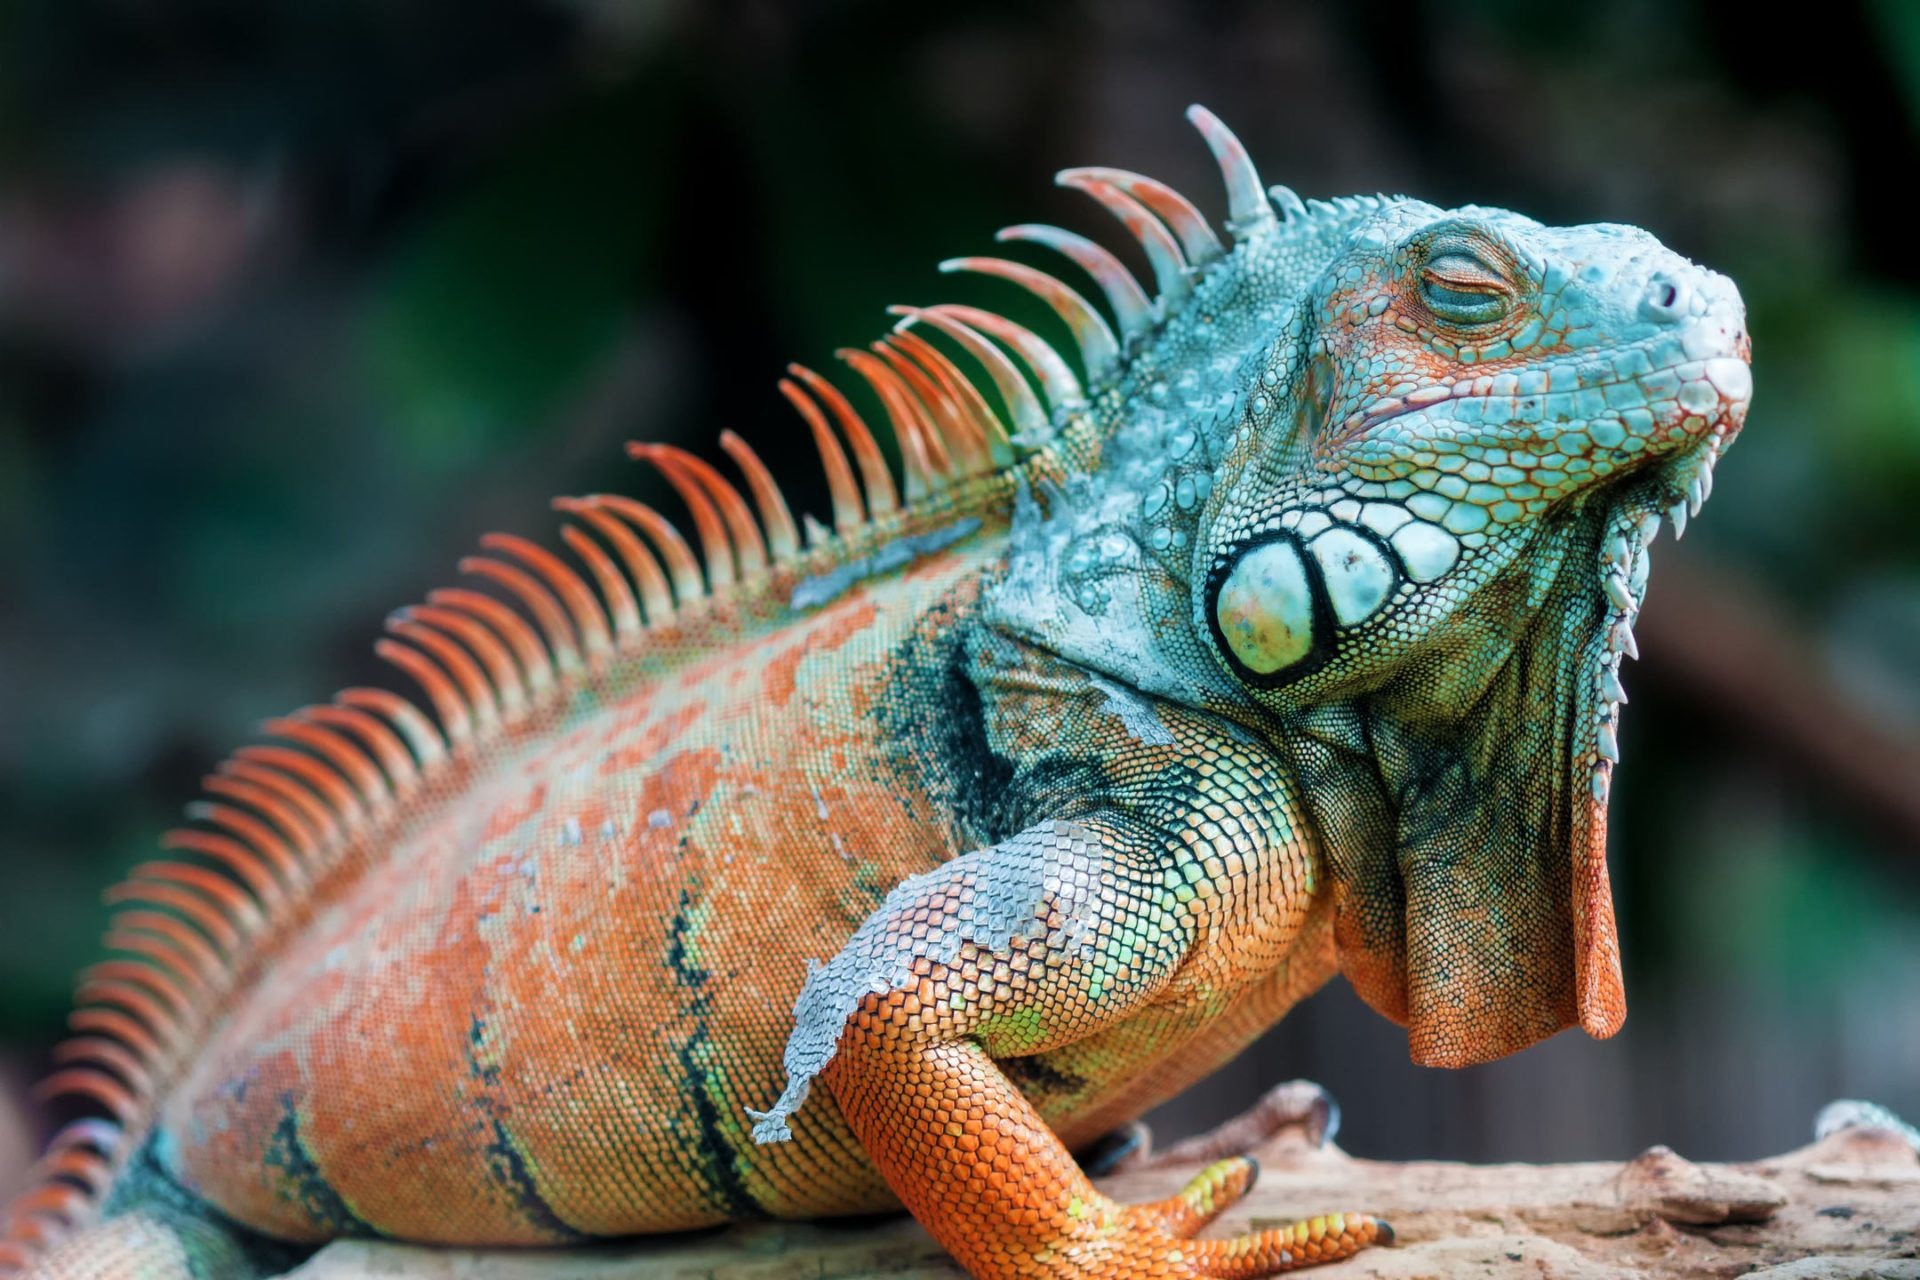 Iguana wallpapers, Stunning reptile, Colorful scales, Nature background, 1920x1280 HD Desktop